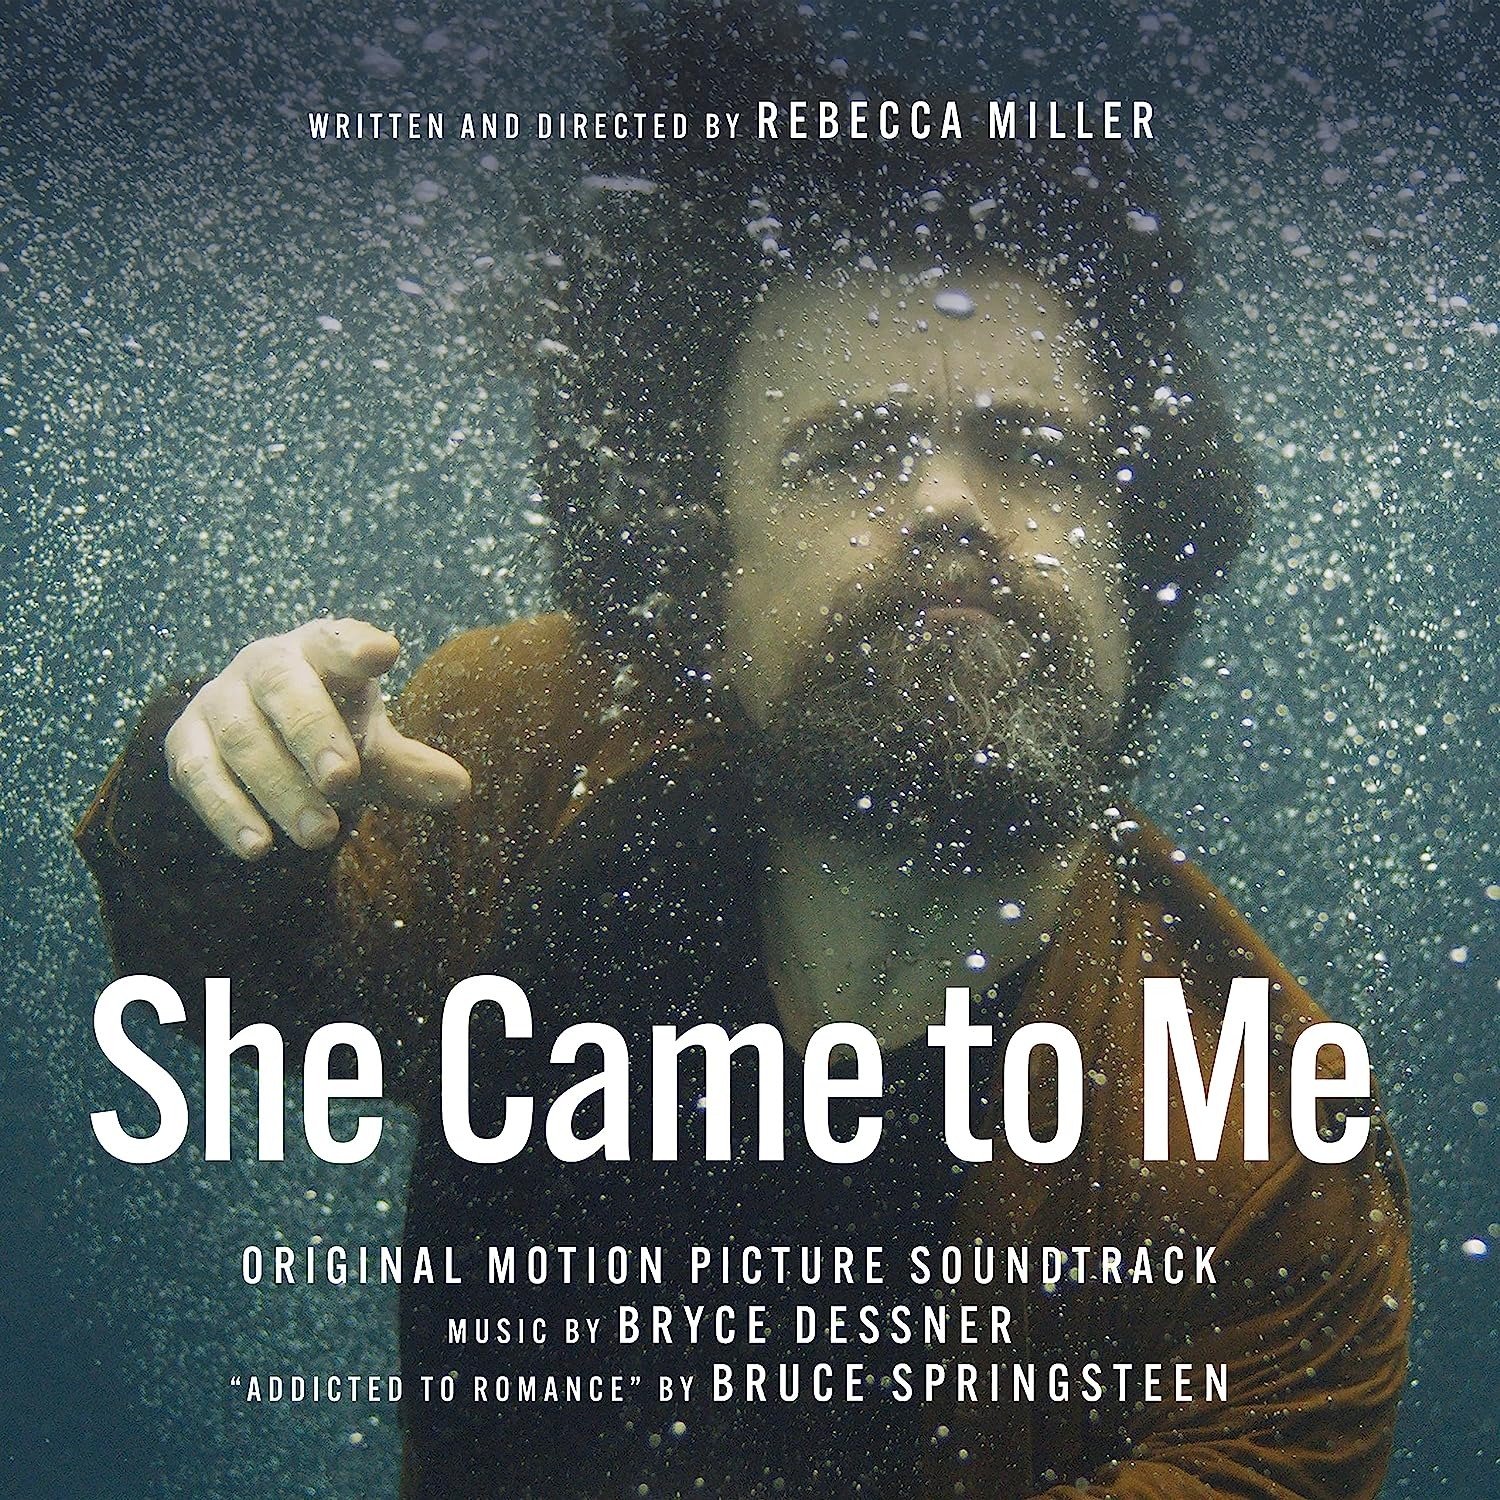 CD Shop - DESSNER, BRYCE SHE CAME TO ME